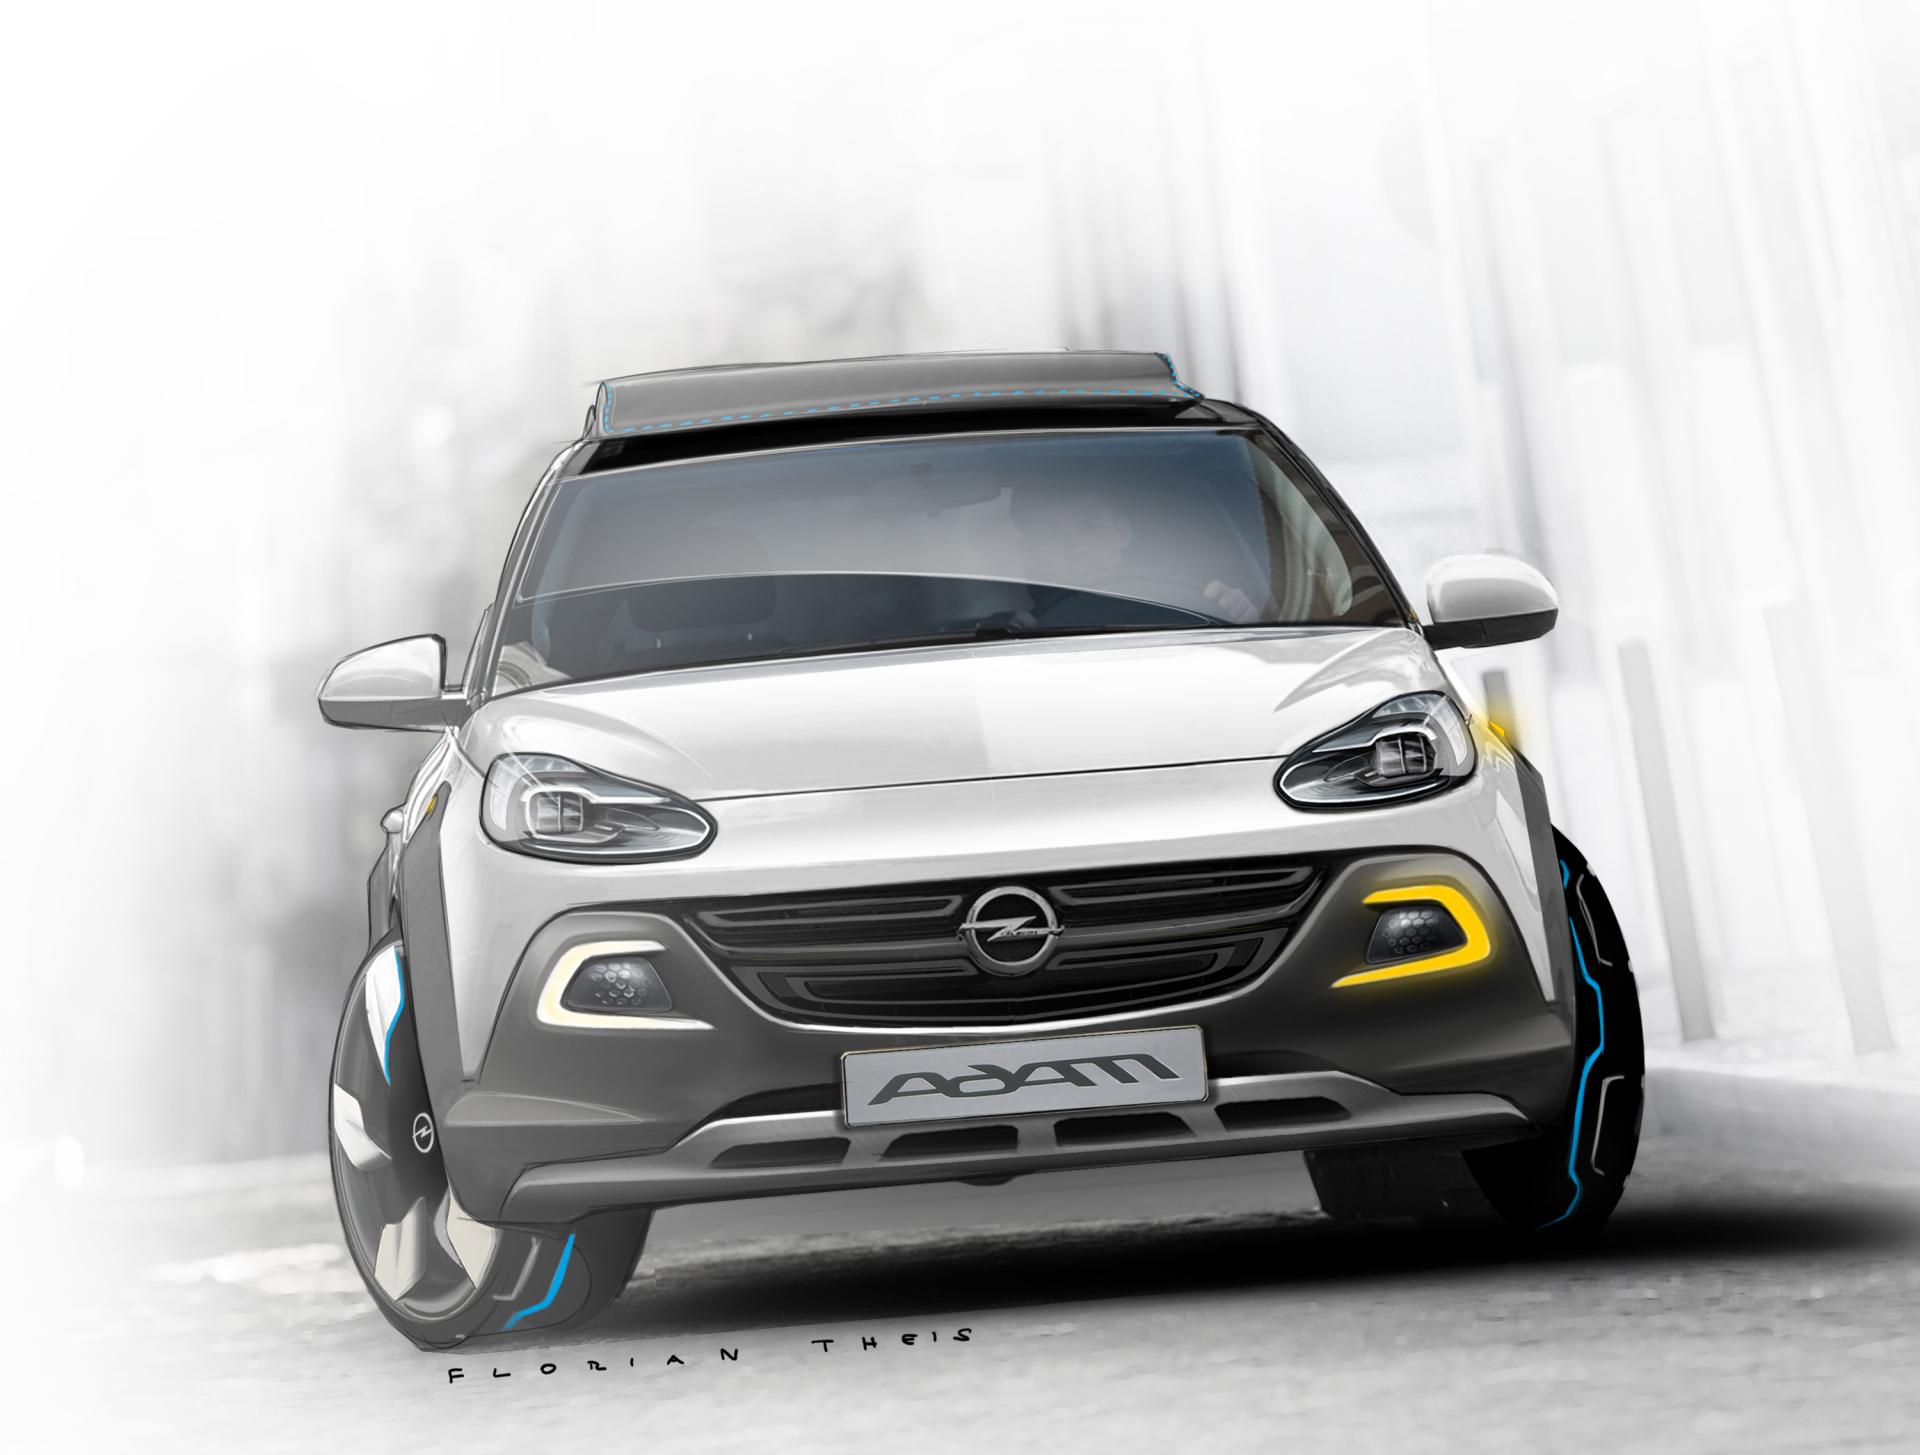 2013 Opel Adam Rocks Concept News And Information Research And Pricing